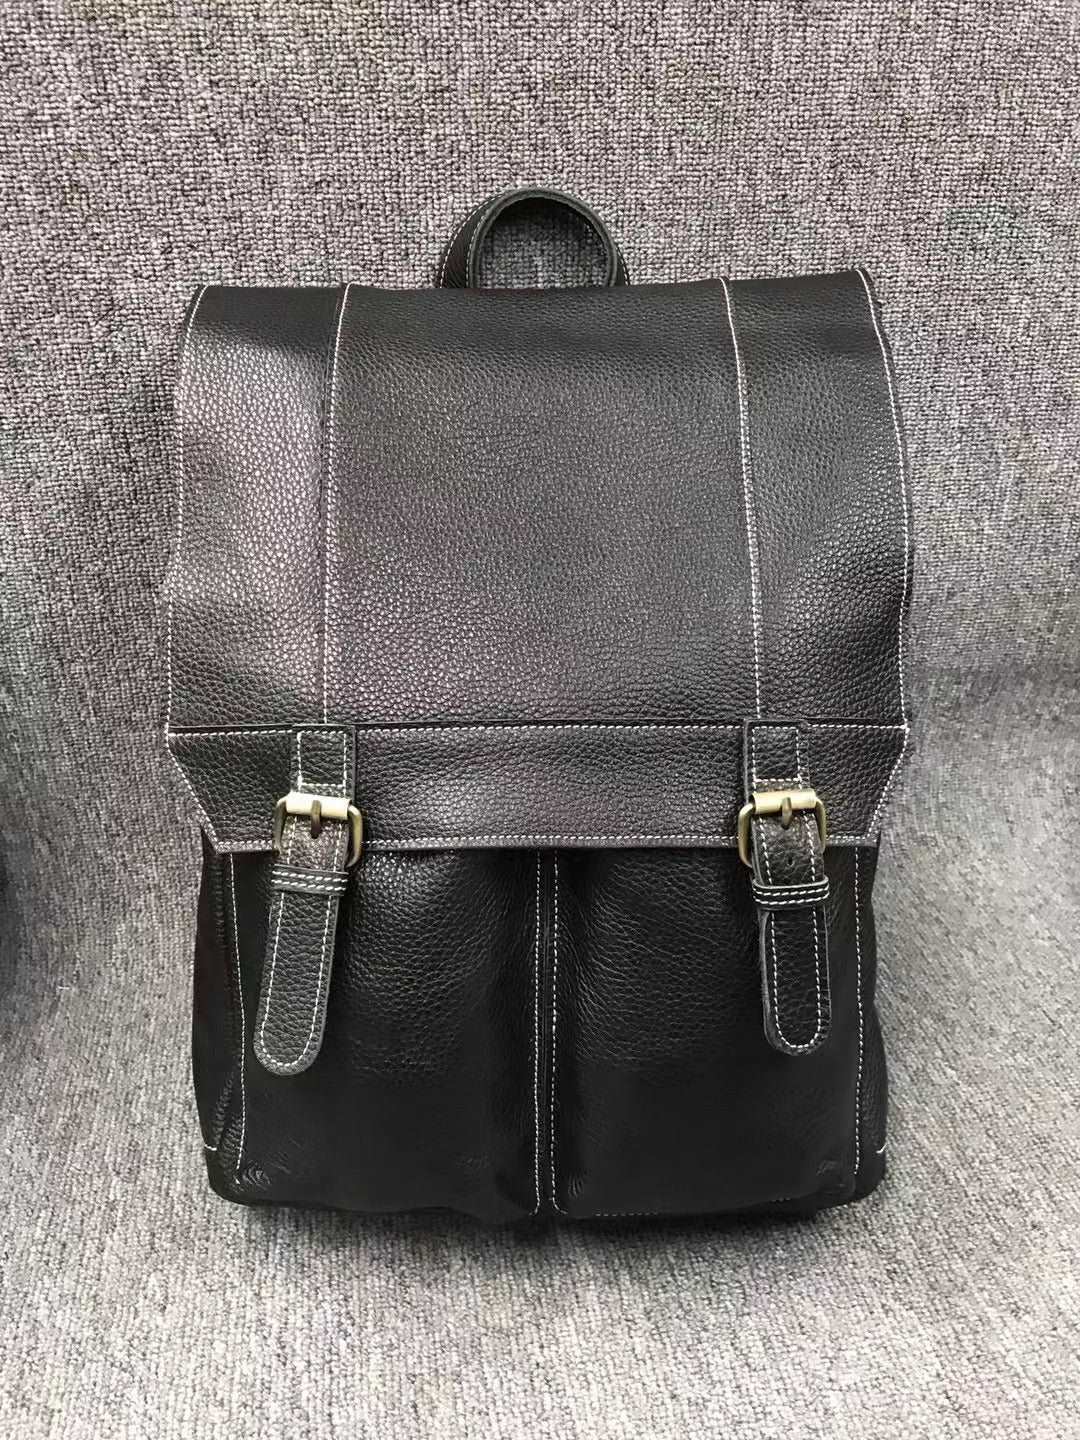 Classic Leather Backpack for Traveling and Daily Use woyaza